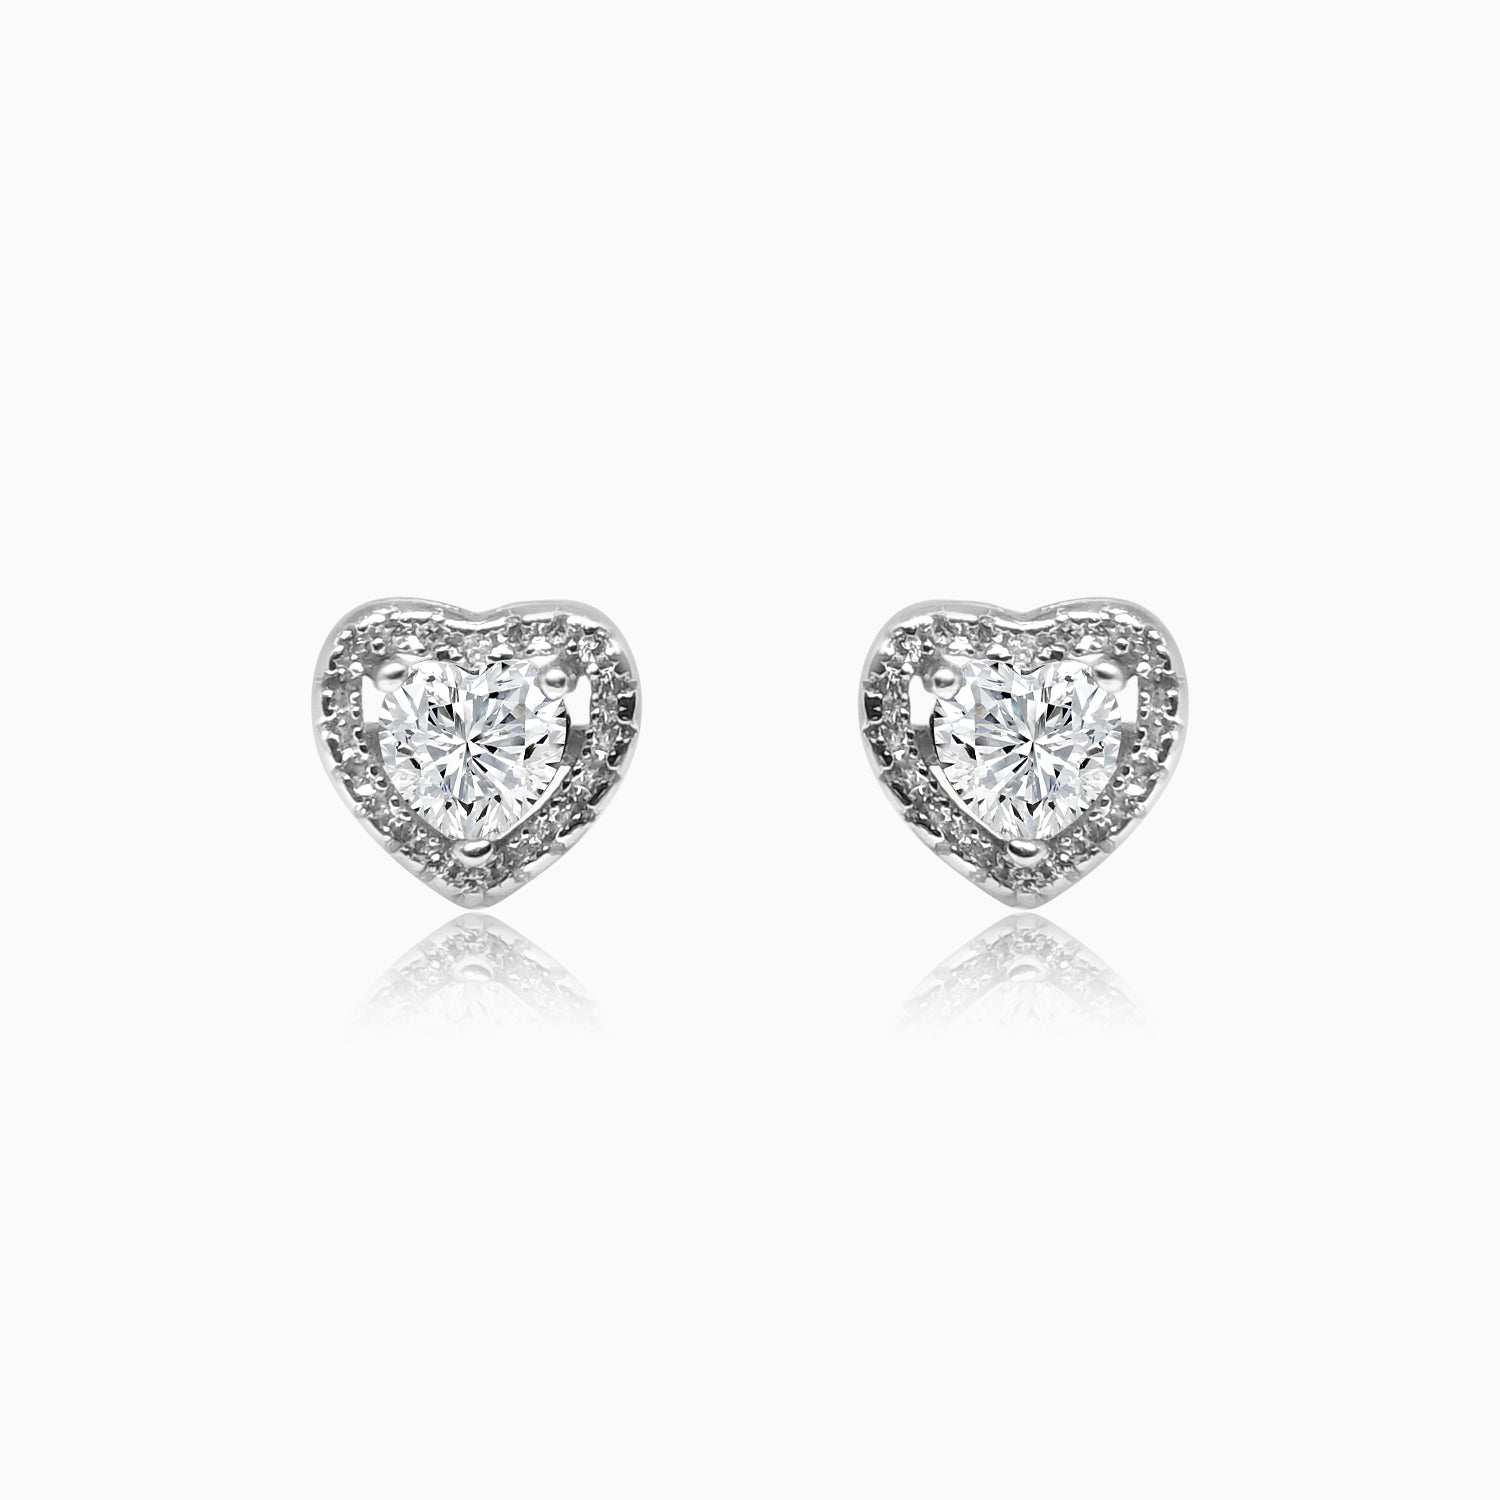 Silver Sparkling Awe Heart Solitaire Earrings